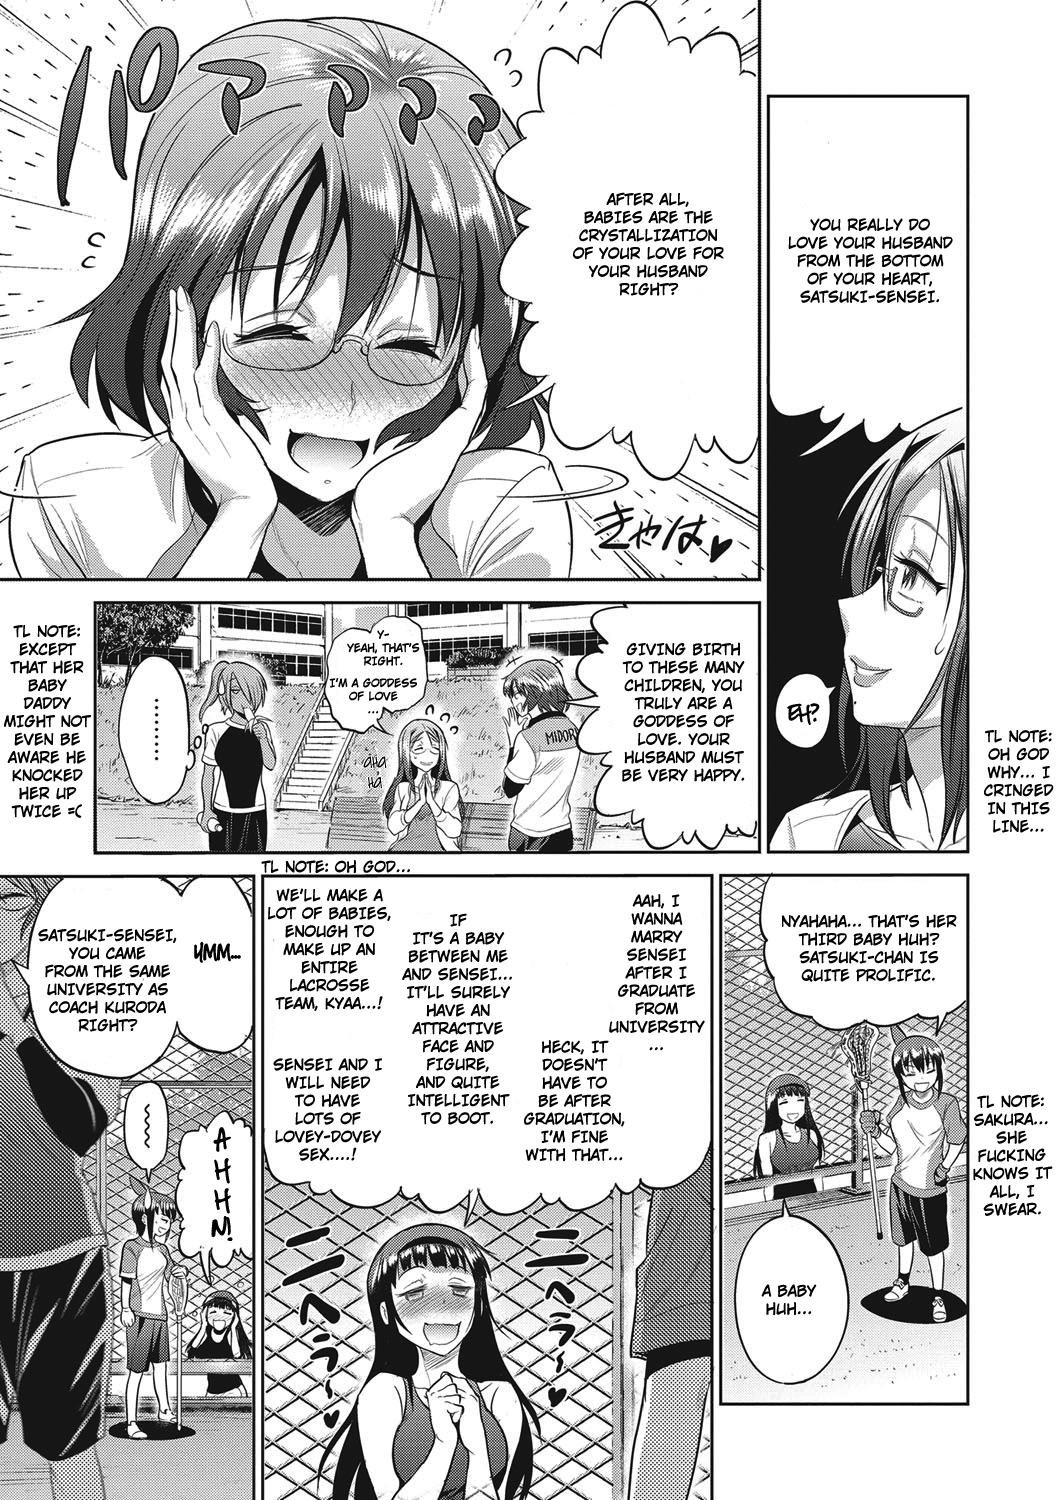 Phat Ass [DISTANCE] Joshi Lacu! - Girls Lacrosse Club ~2 Years Later~ Ch. 3 (COMIC ExE 04) [English] [TripleSevenScans] [Digital] Oiled - Page 7